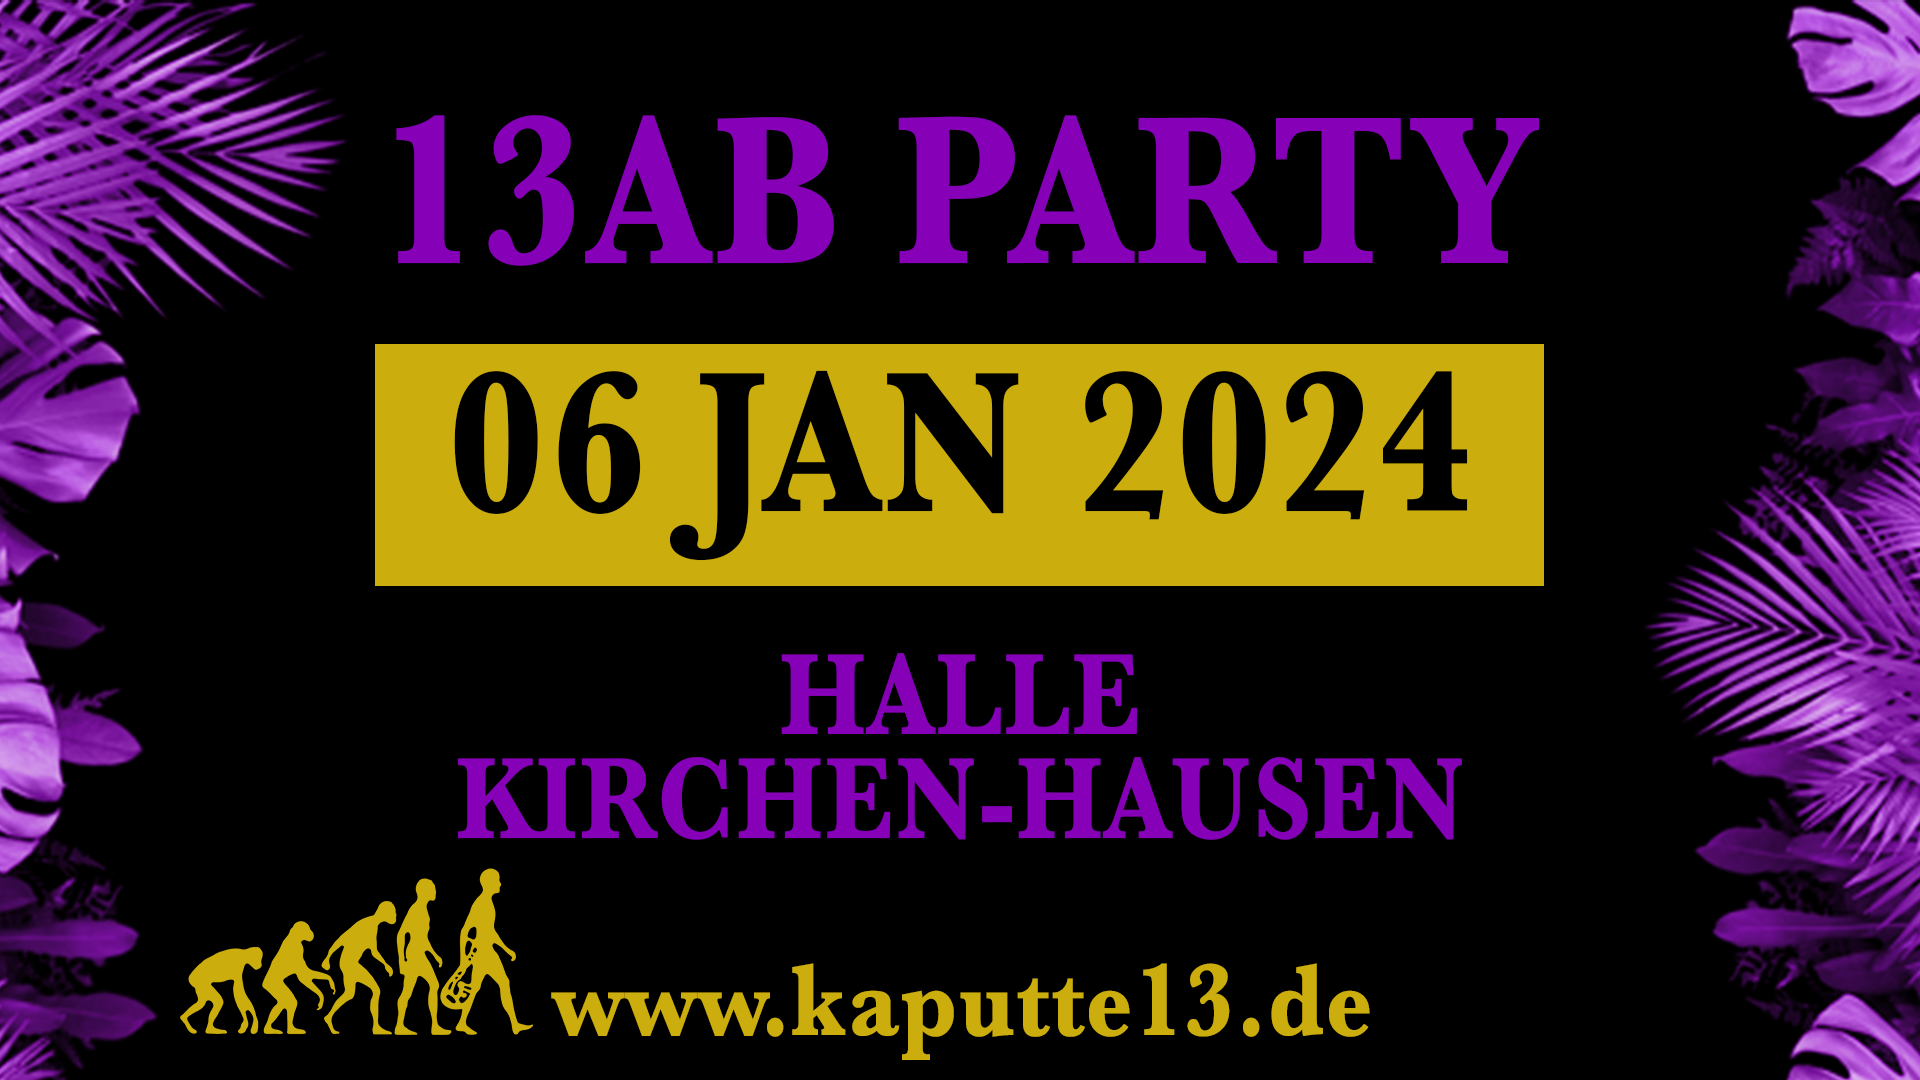 13ab Party